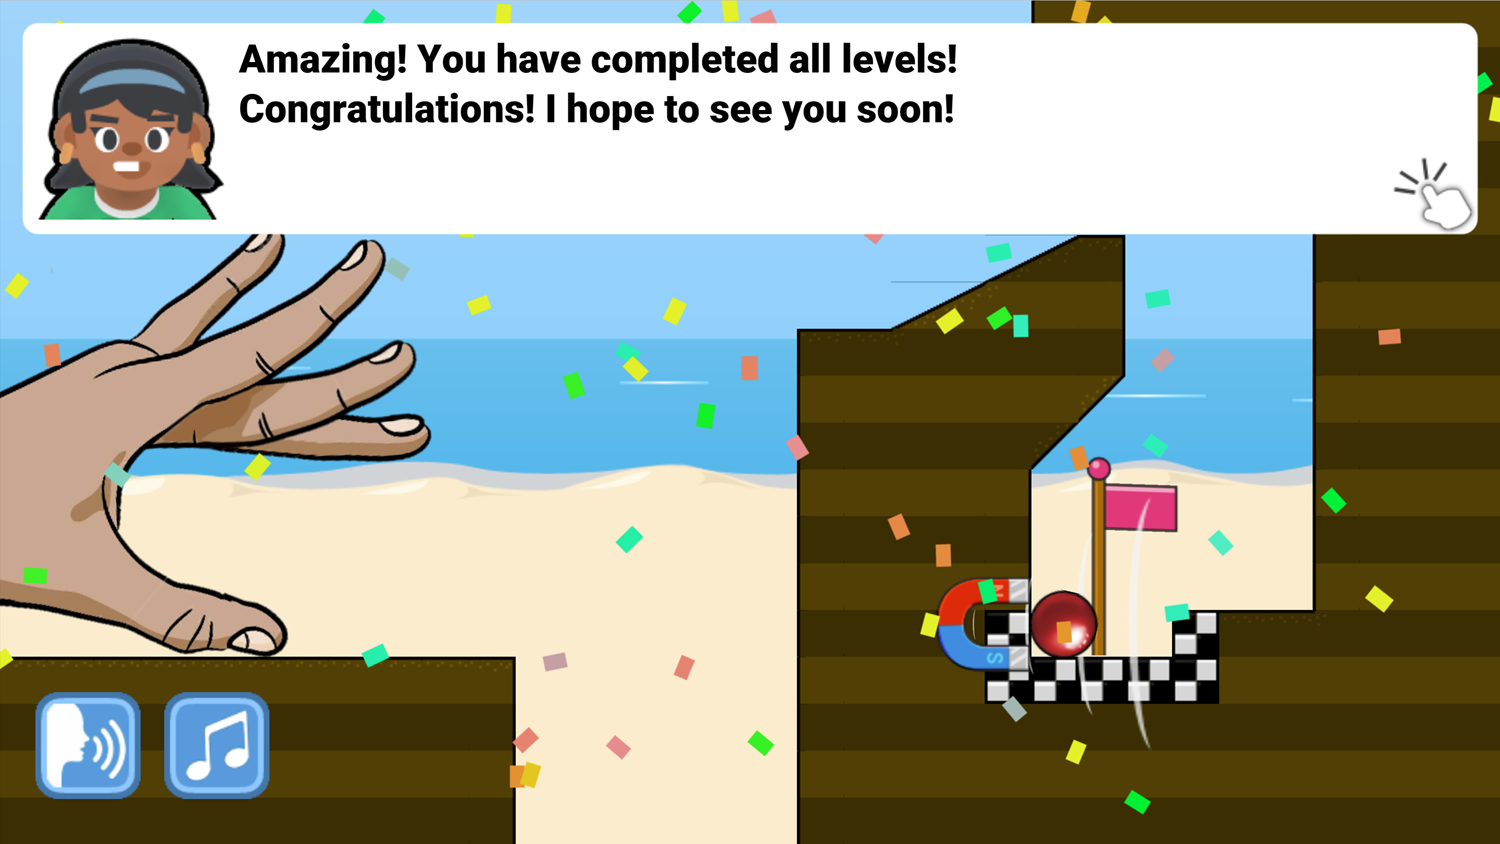 Flick a Marble Game Levels Completed Screenshot.